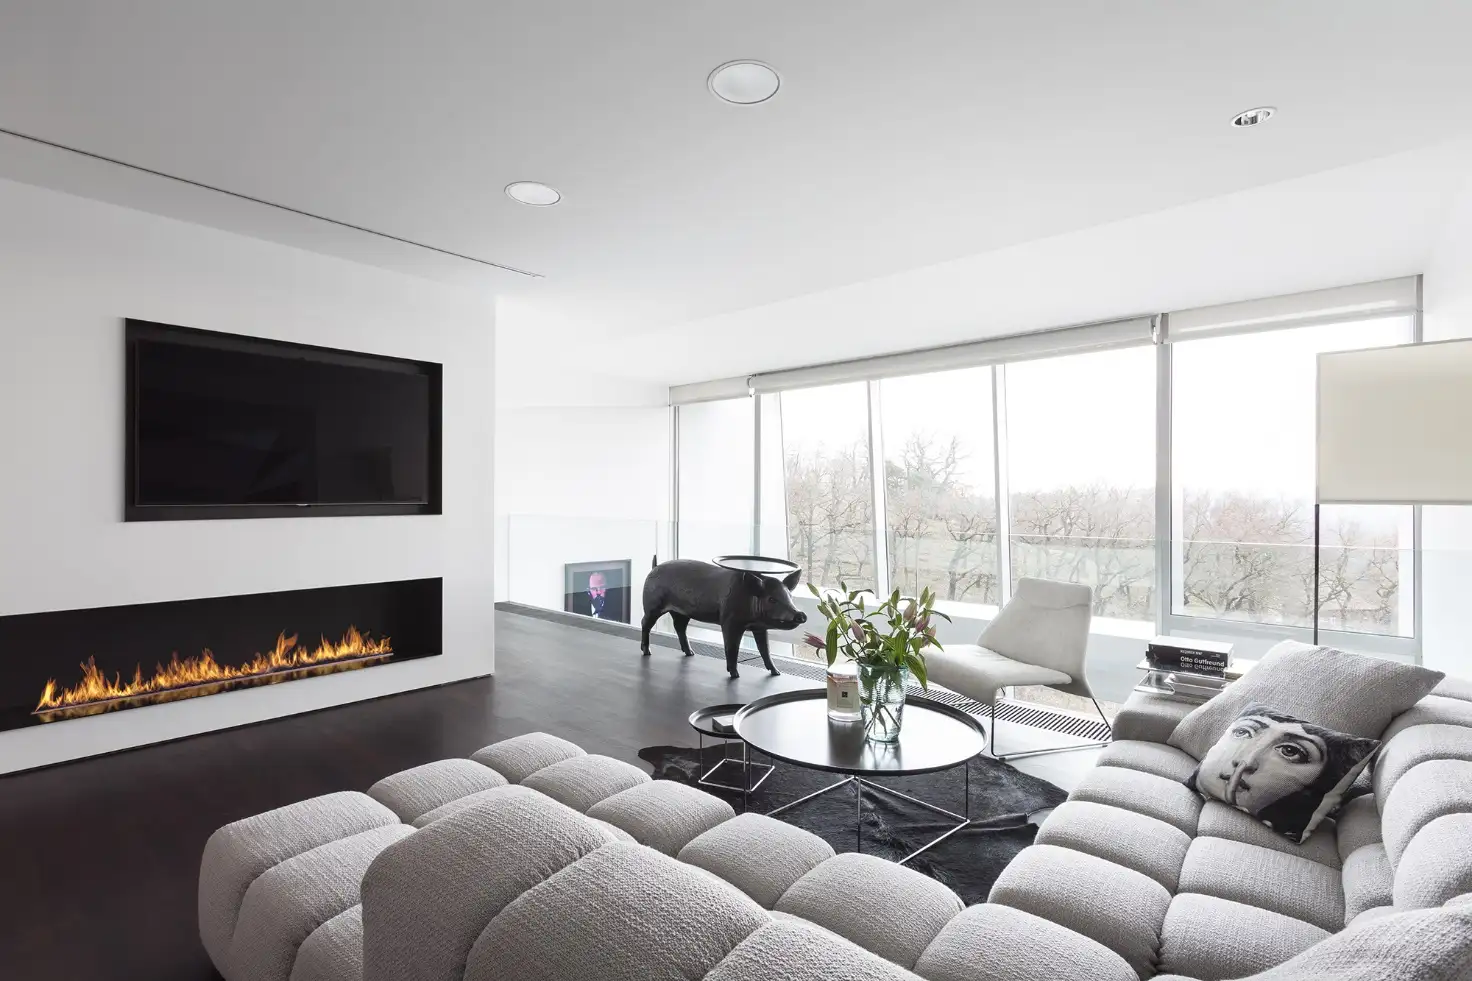 How to decorate living room with a fireplace and a TV